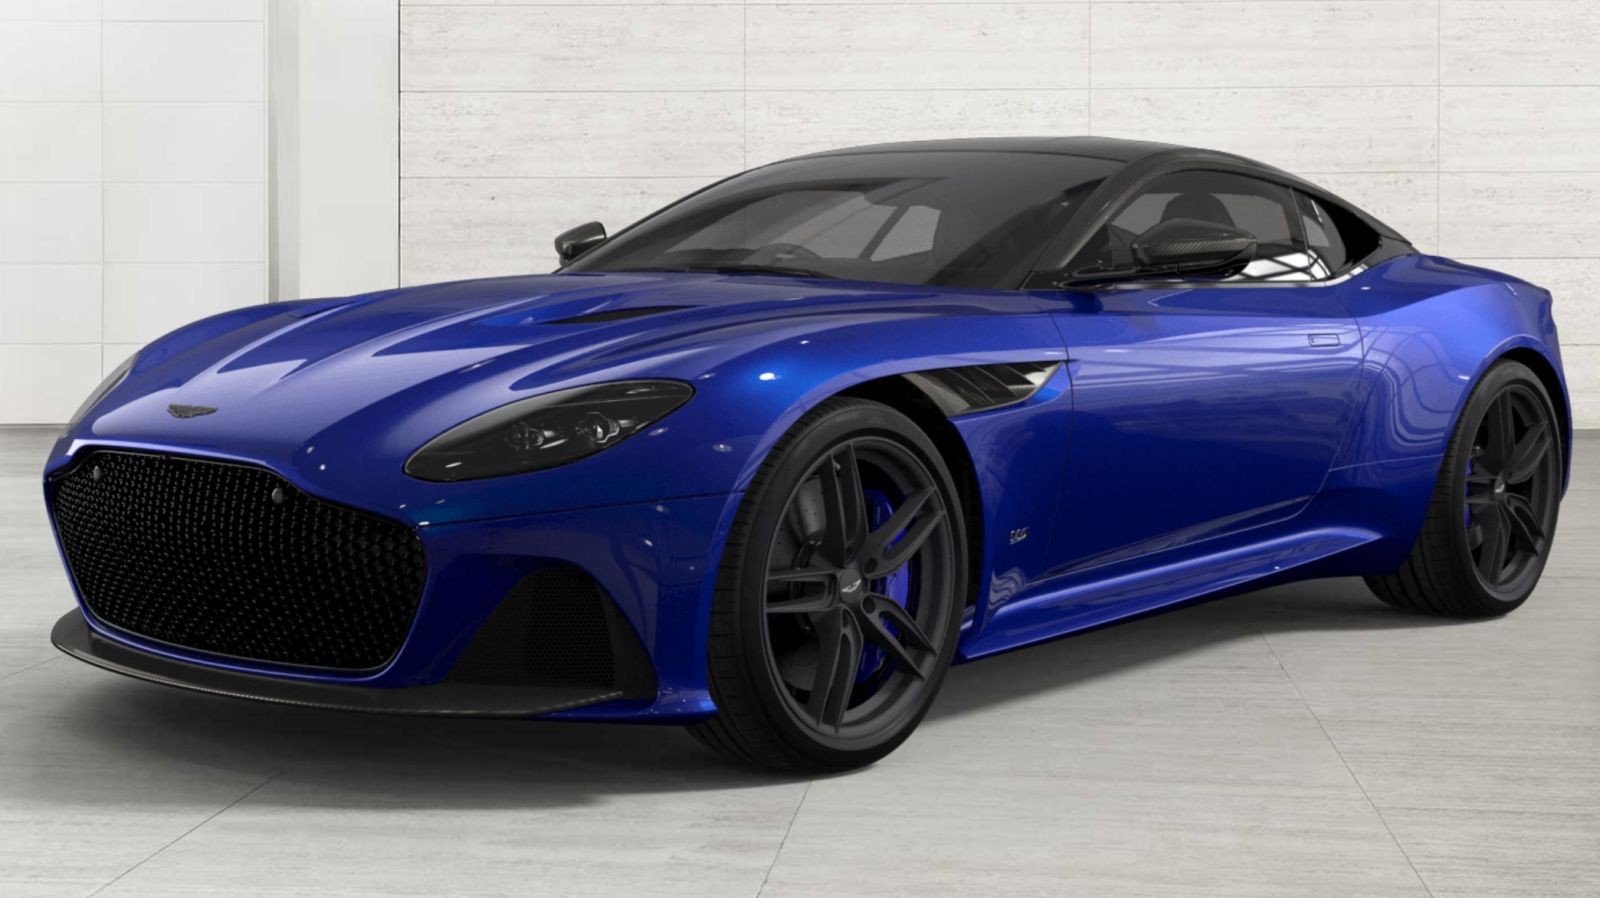 Illustration for article titled The Aston Martin DBS Superleggera configurator is now online. Post what you make in the comments if thats your thing.